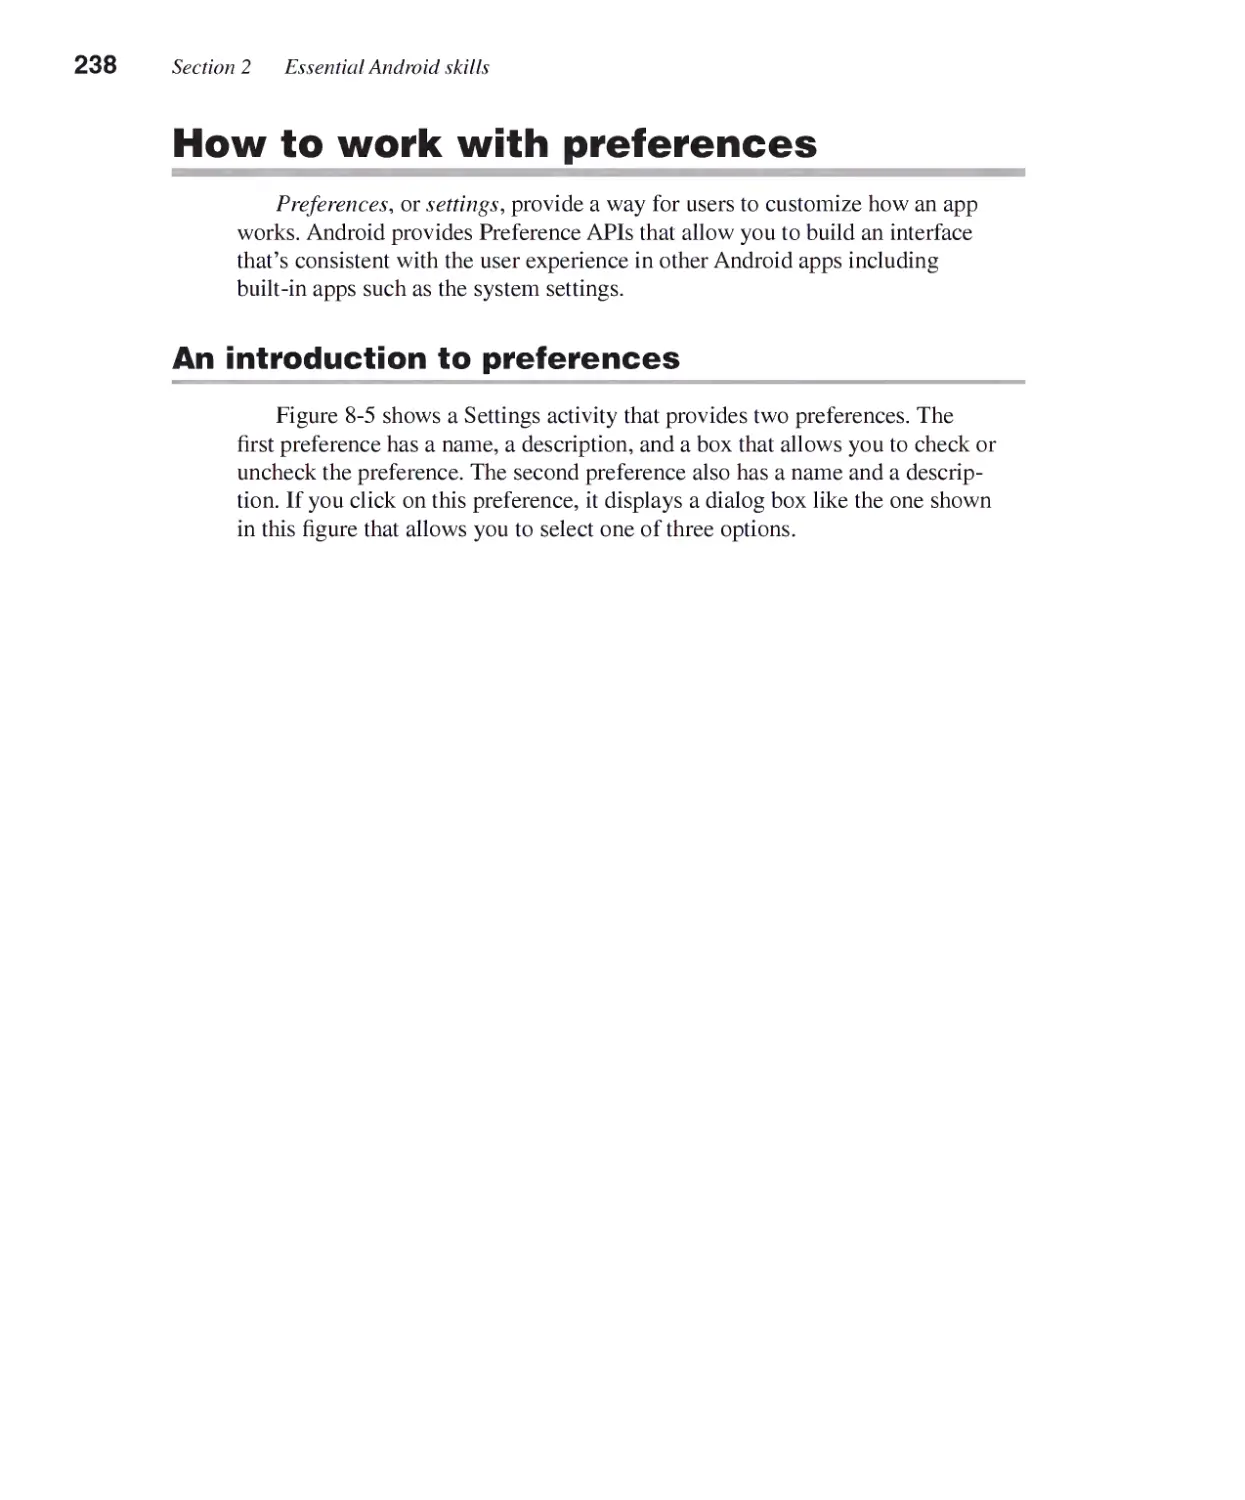 How to Work with Preferences